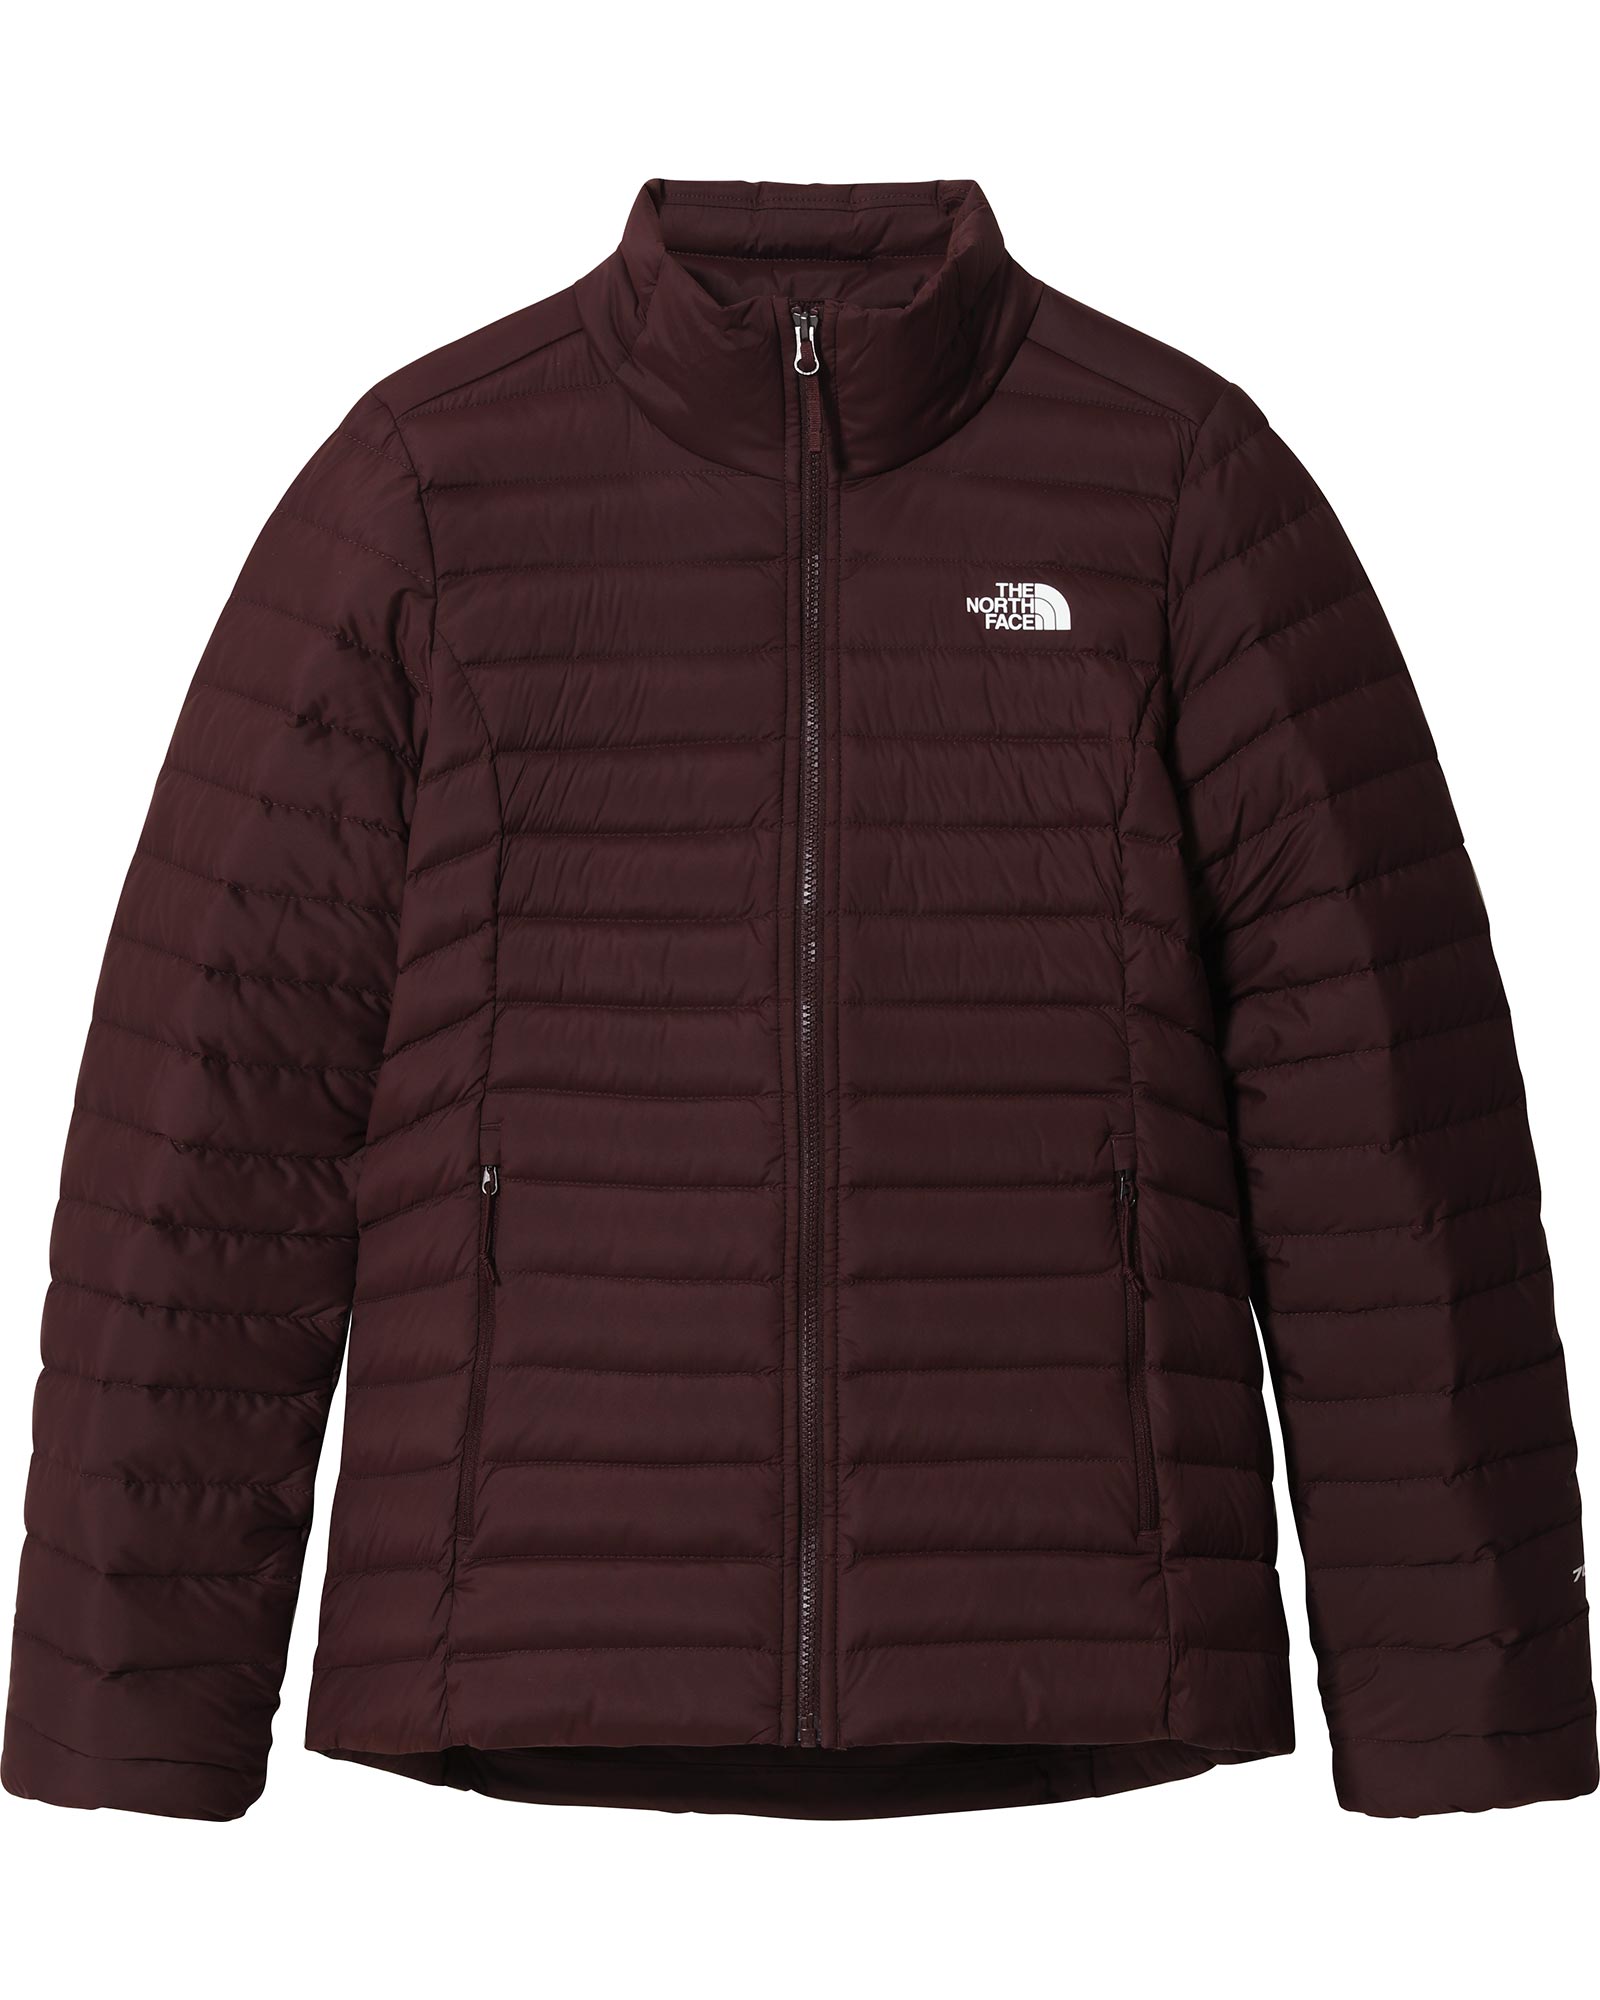 The North Face Stretch Down Women’s Jacket - Root Brown S